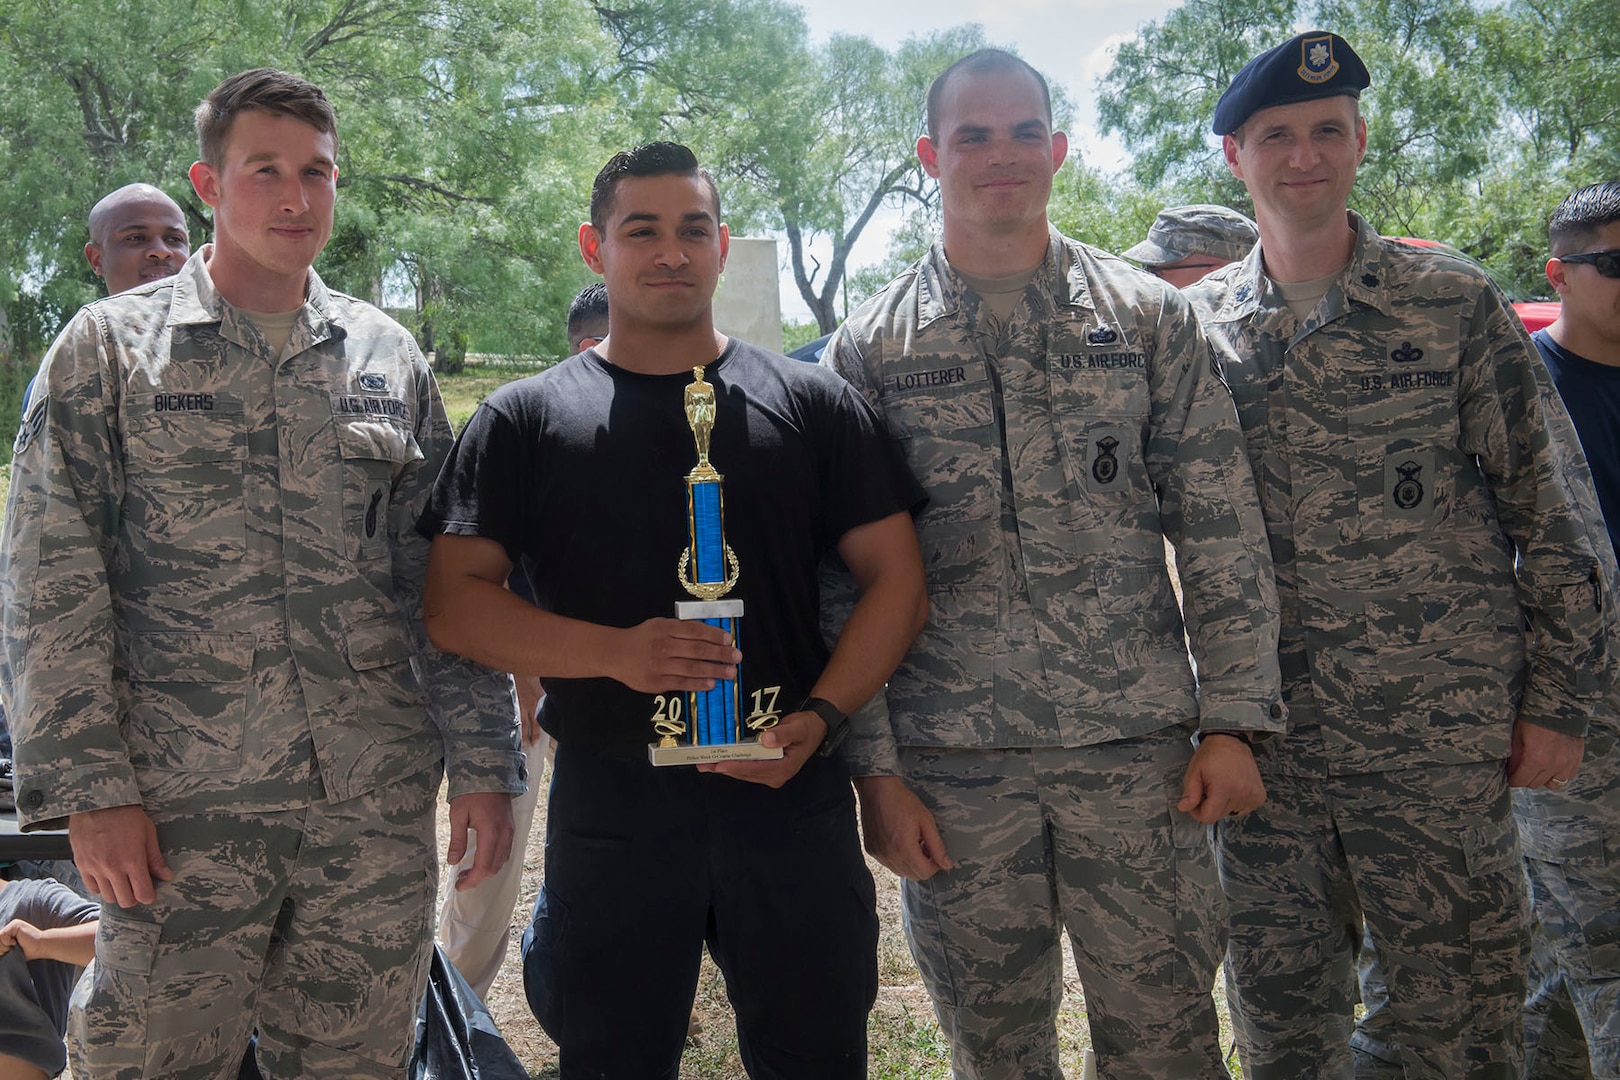 Members of the 343rd Training Squadron accept their first place trophy after competing in the Obstacle Course Team Challenge May 15, 2017, at Joint Base San Antonio-Lackland, Texas, Medina Annex. The event was held as part of National Police Week, an annual celebration to honor the service and sacrifice of law enforcement members and pays special tribute to law enforcement officers who have lost their lives in the line of duty for the safety and protection of others. JBSA security forces members participated participate in events weeklong May 15-19 across the installations. (U.S. Air Force photo by Staff Sgt. Marissa Garner)